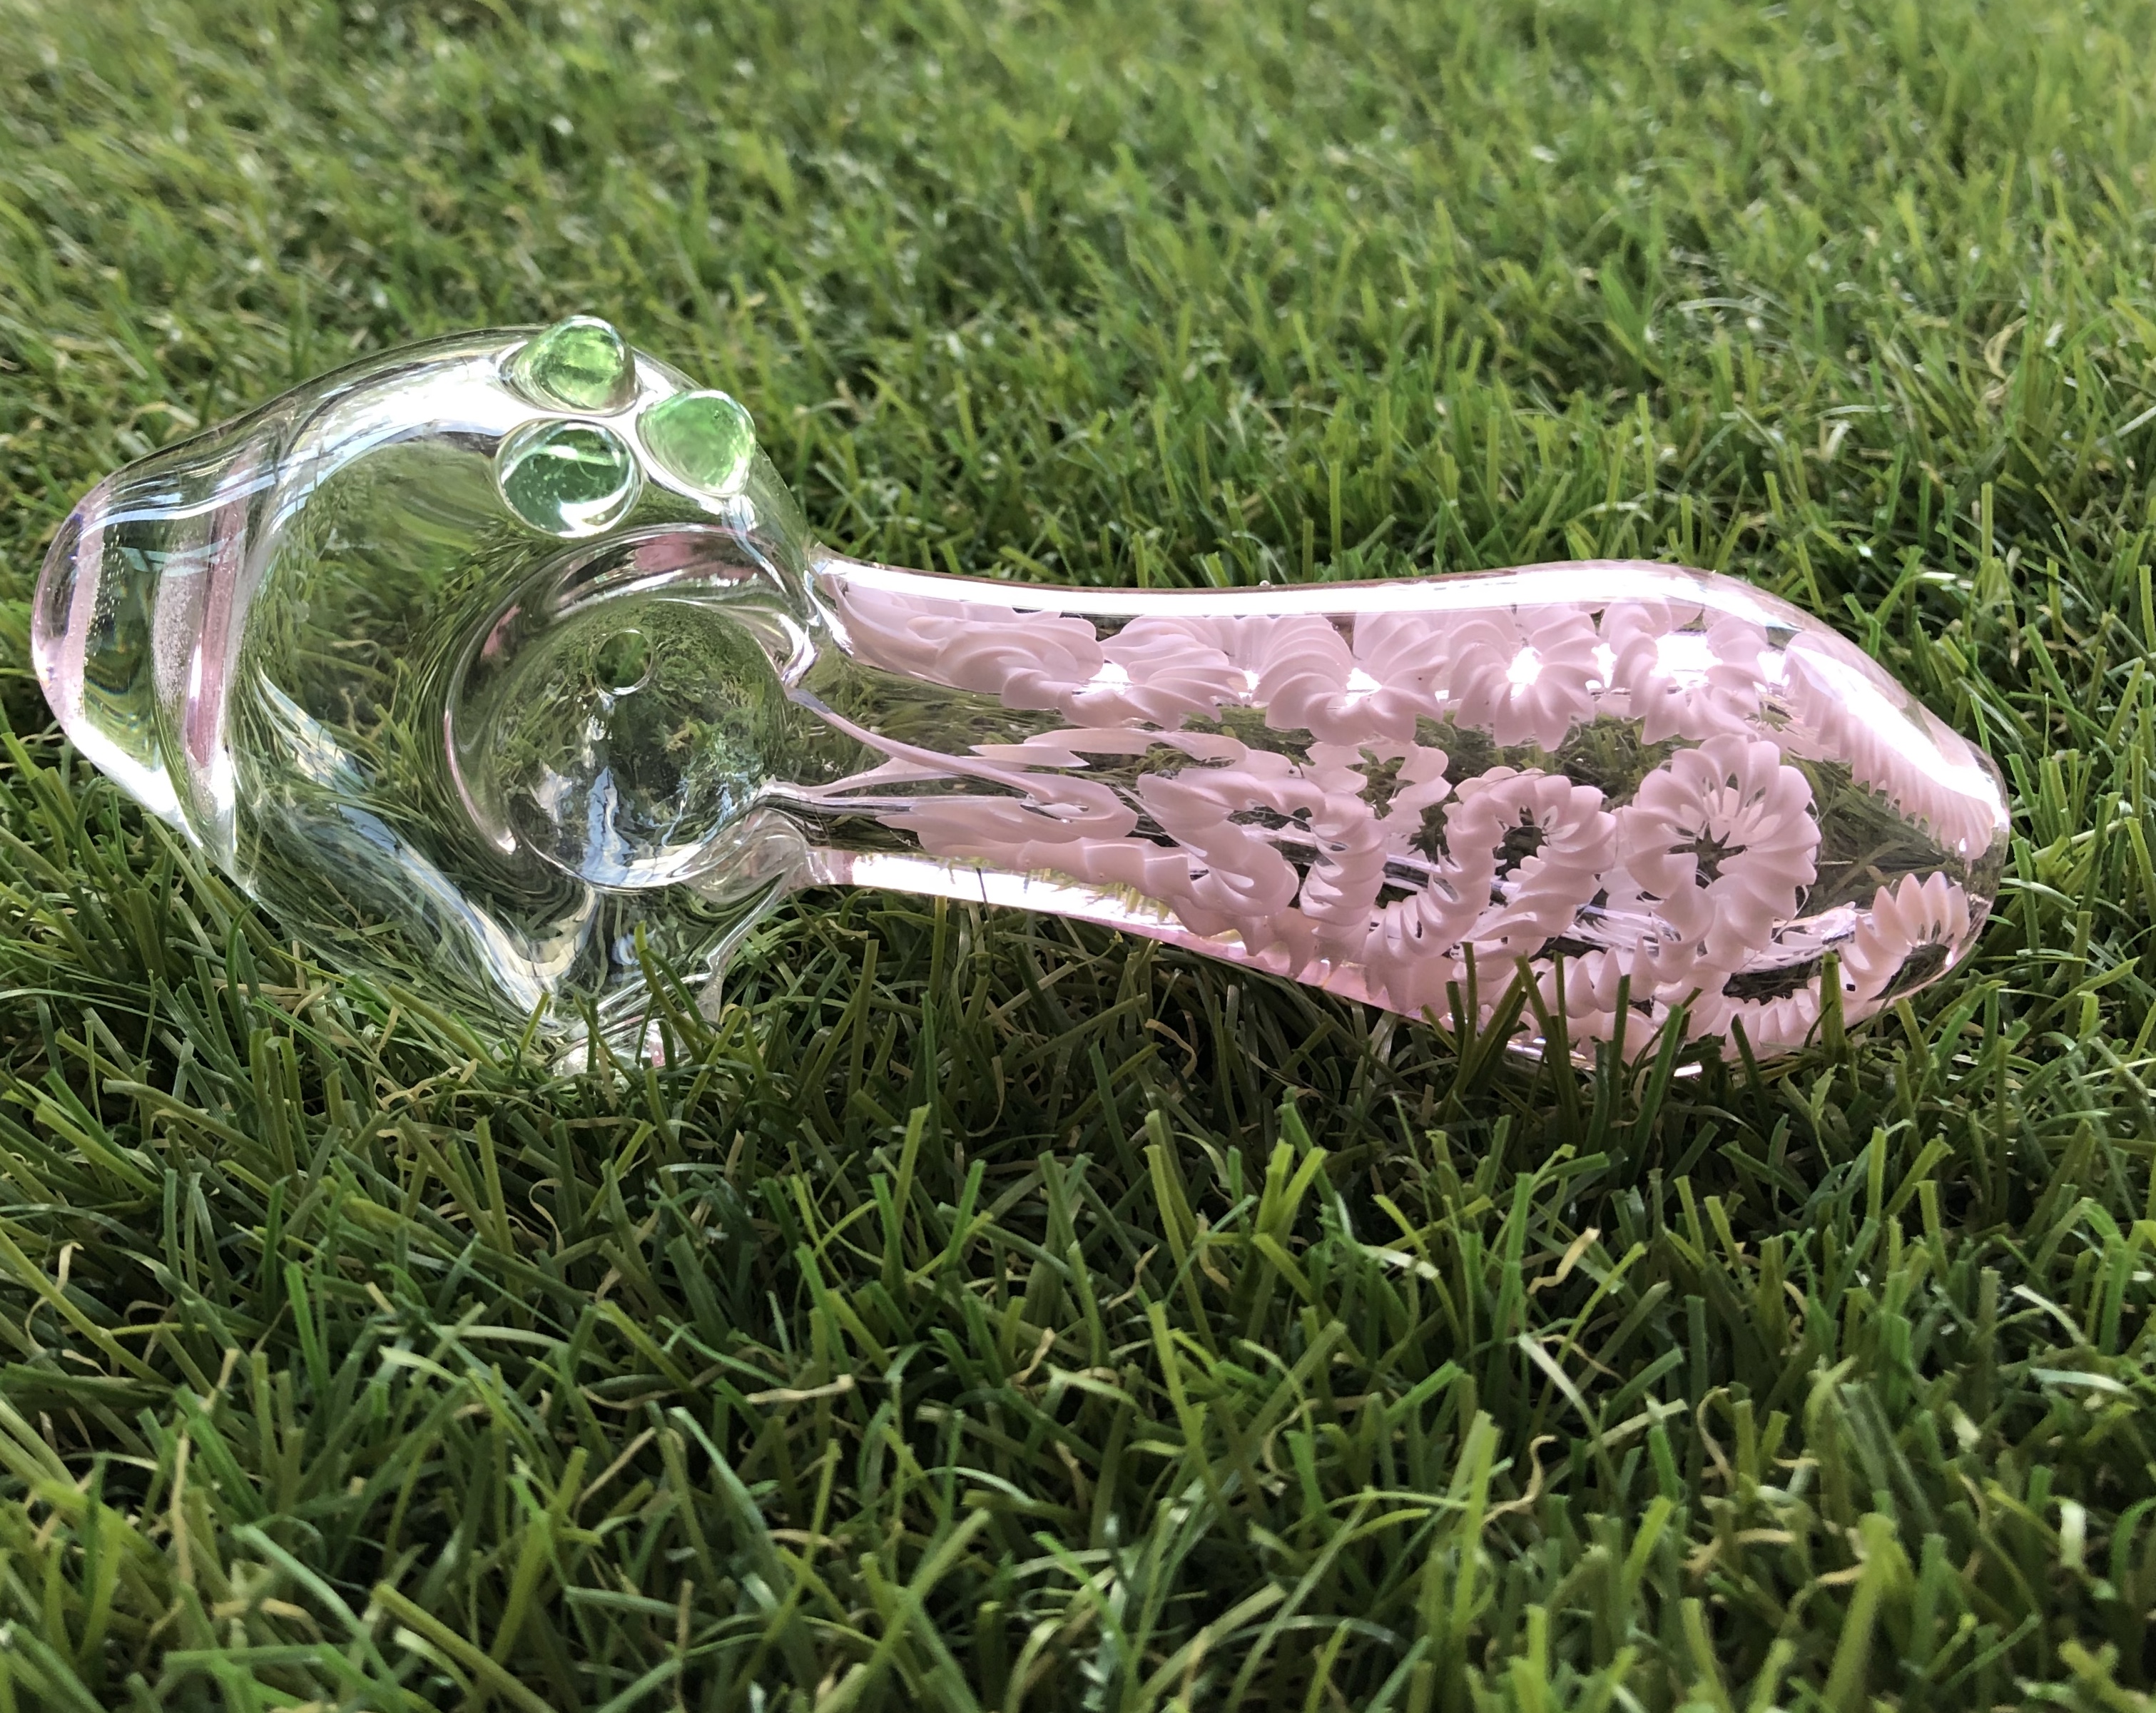 You could find a really nice glass pipe with a reasonable price tag if you know how to inspect smoke pipes.